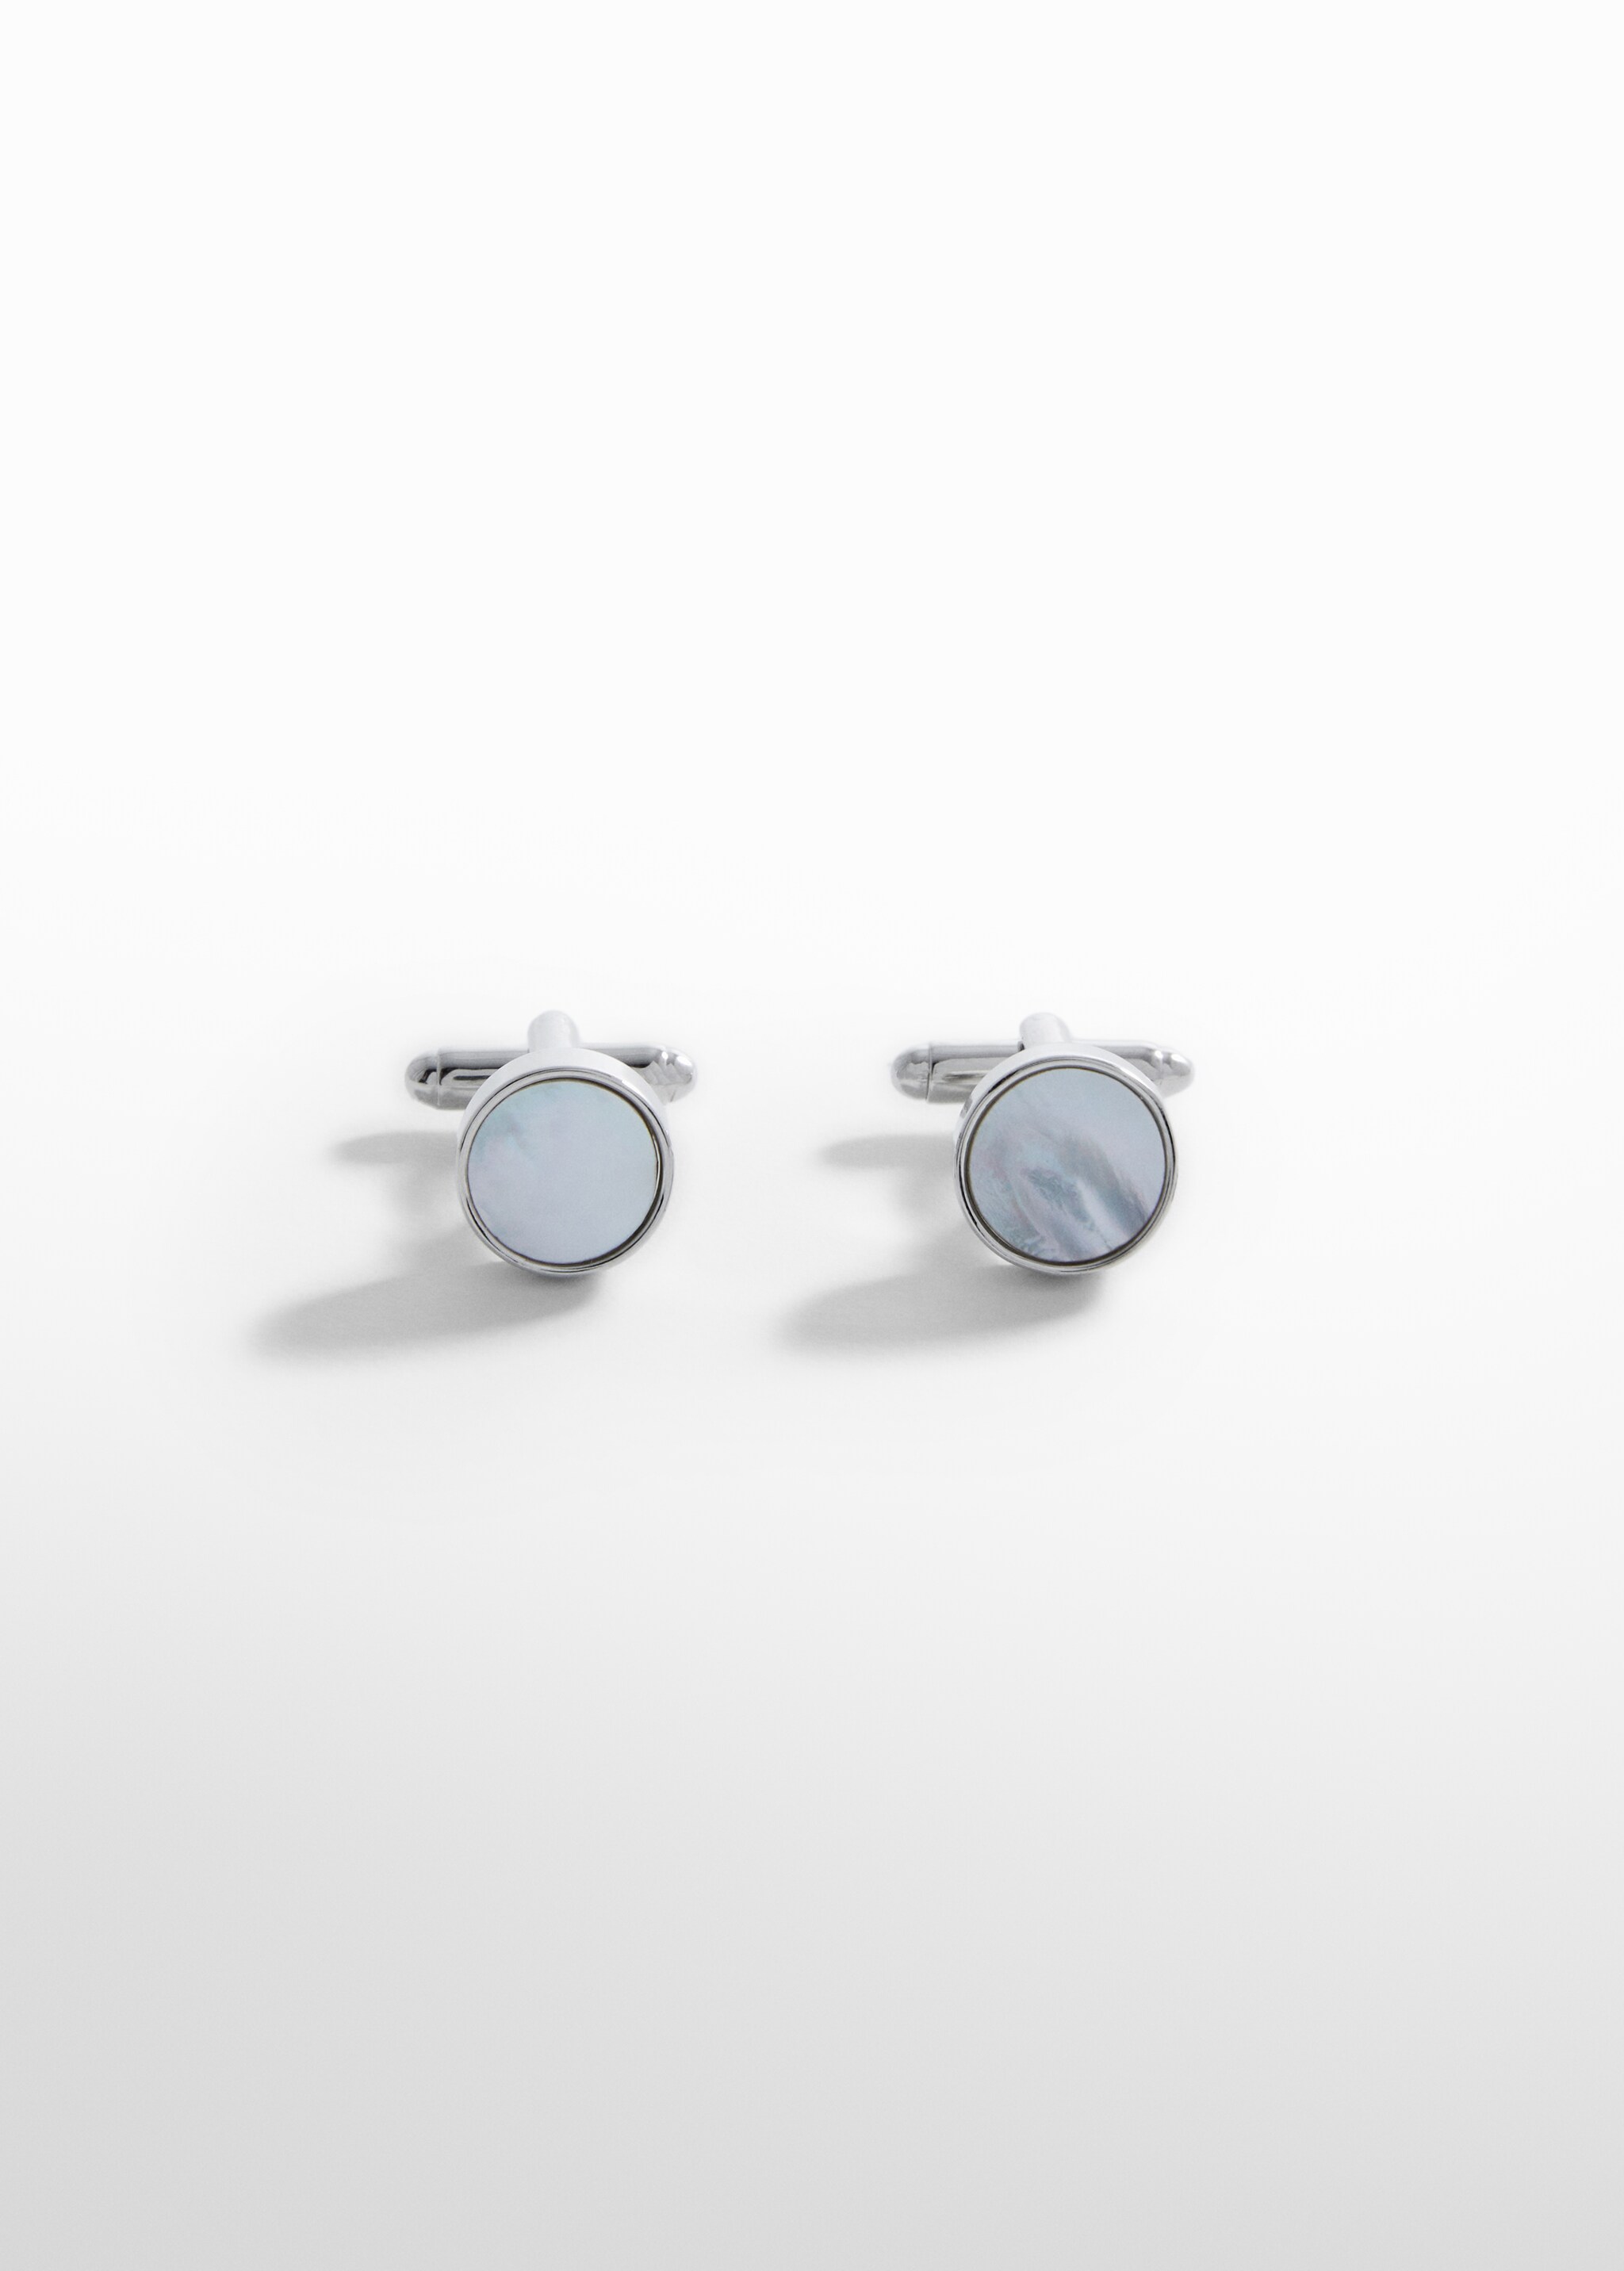 Round mother-of-pearl cufflinks - Article without model